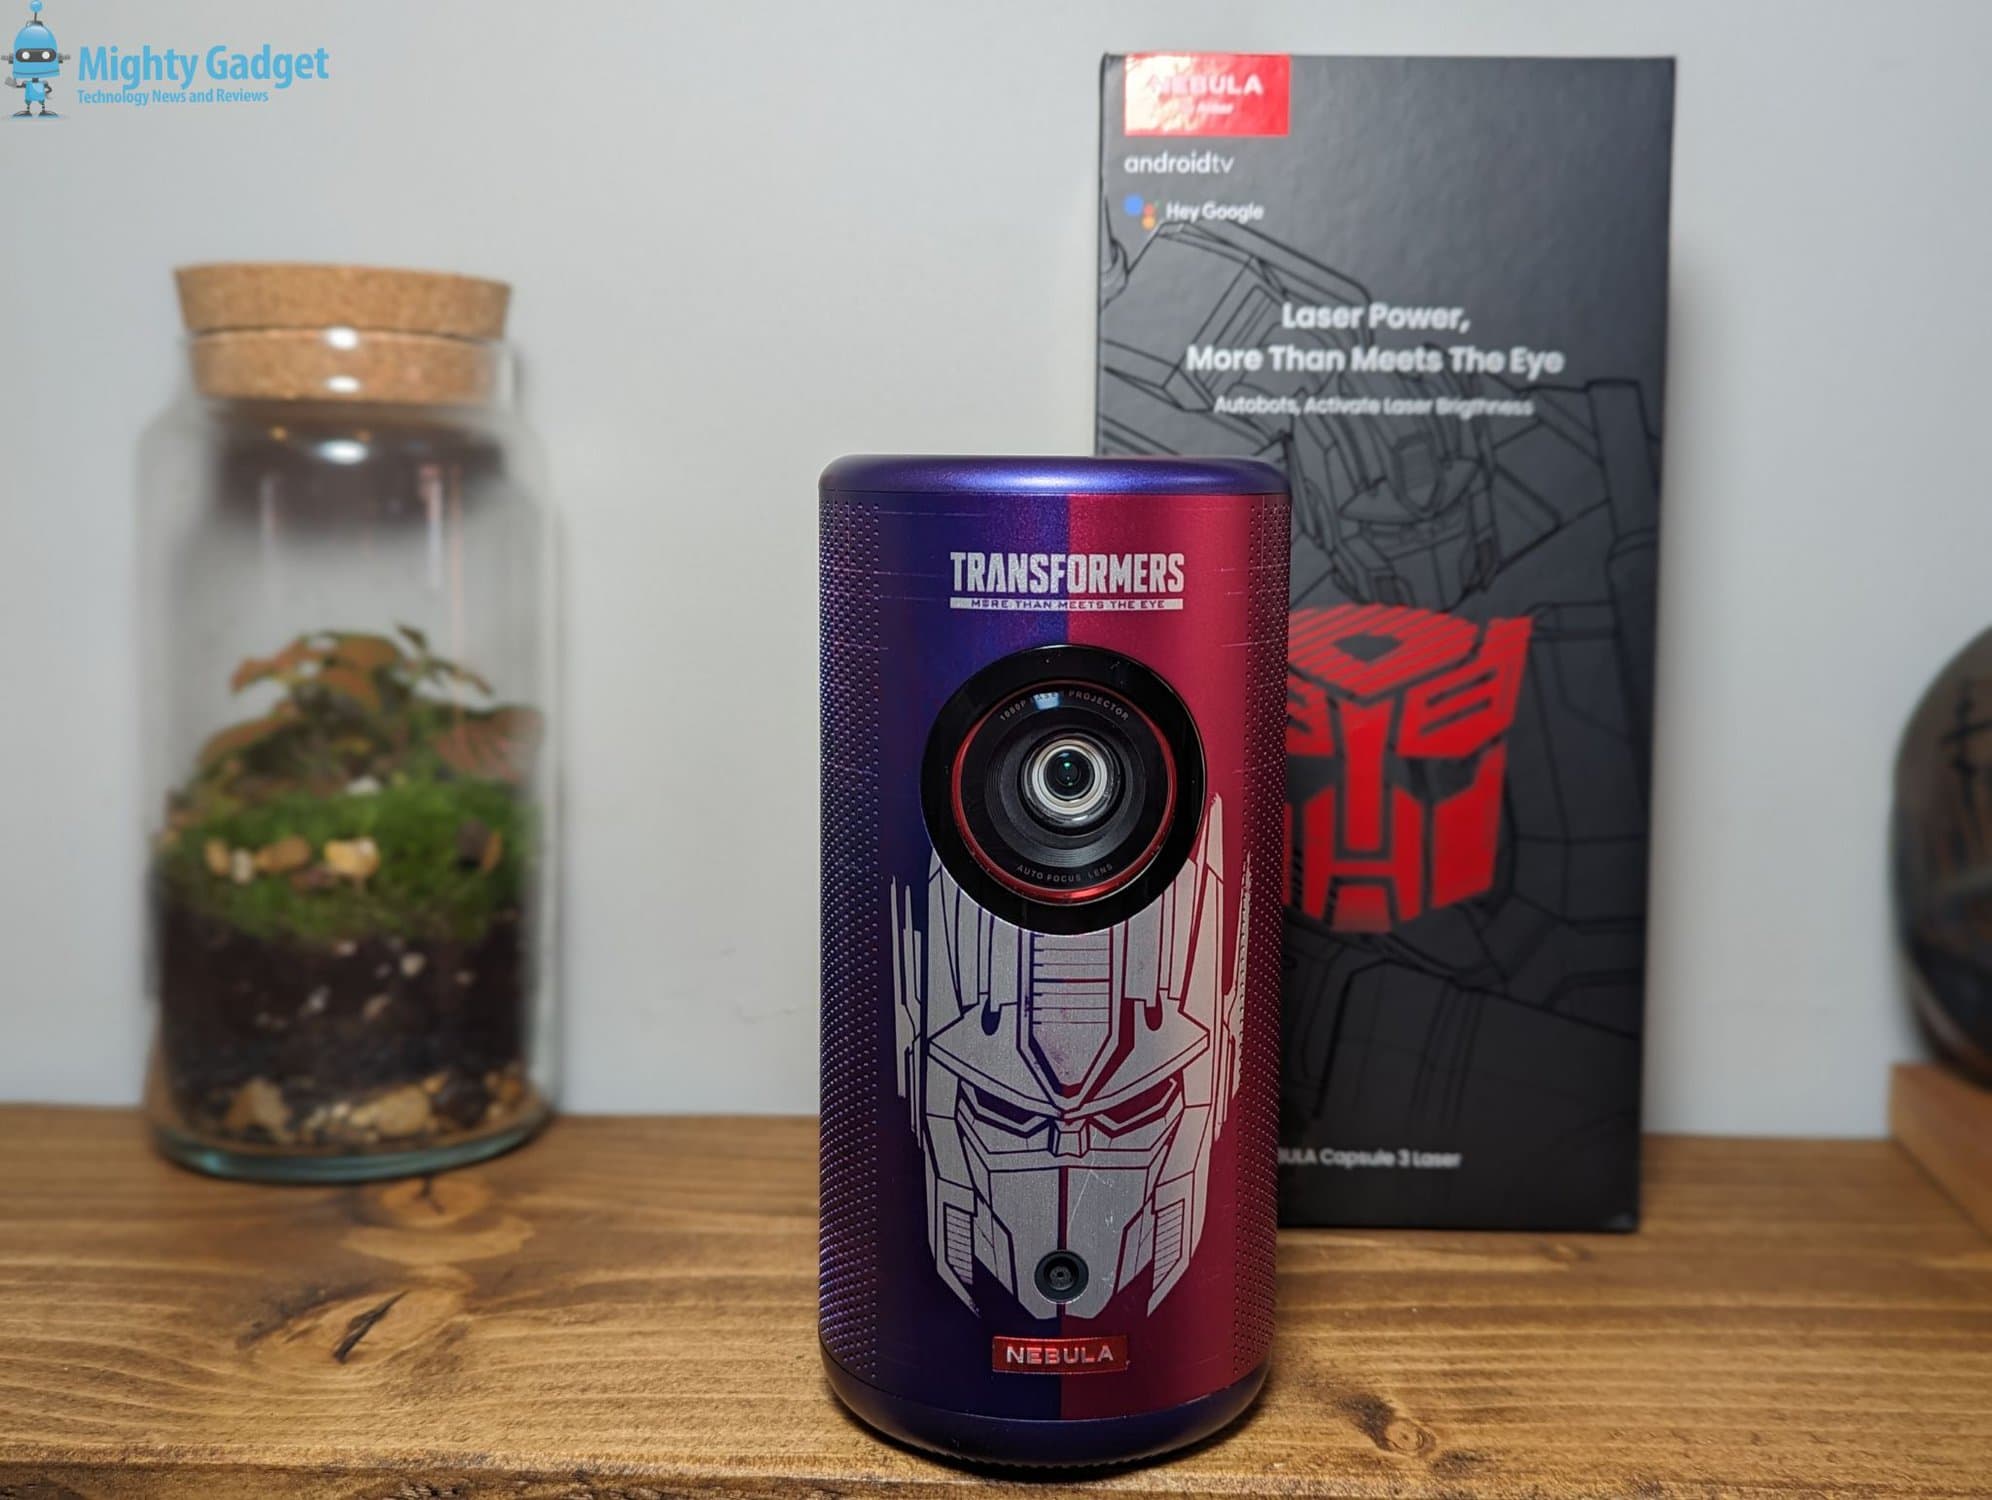 Nebula Capsule 3 Laser Review by Mighty Gadget